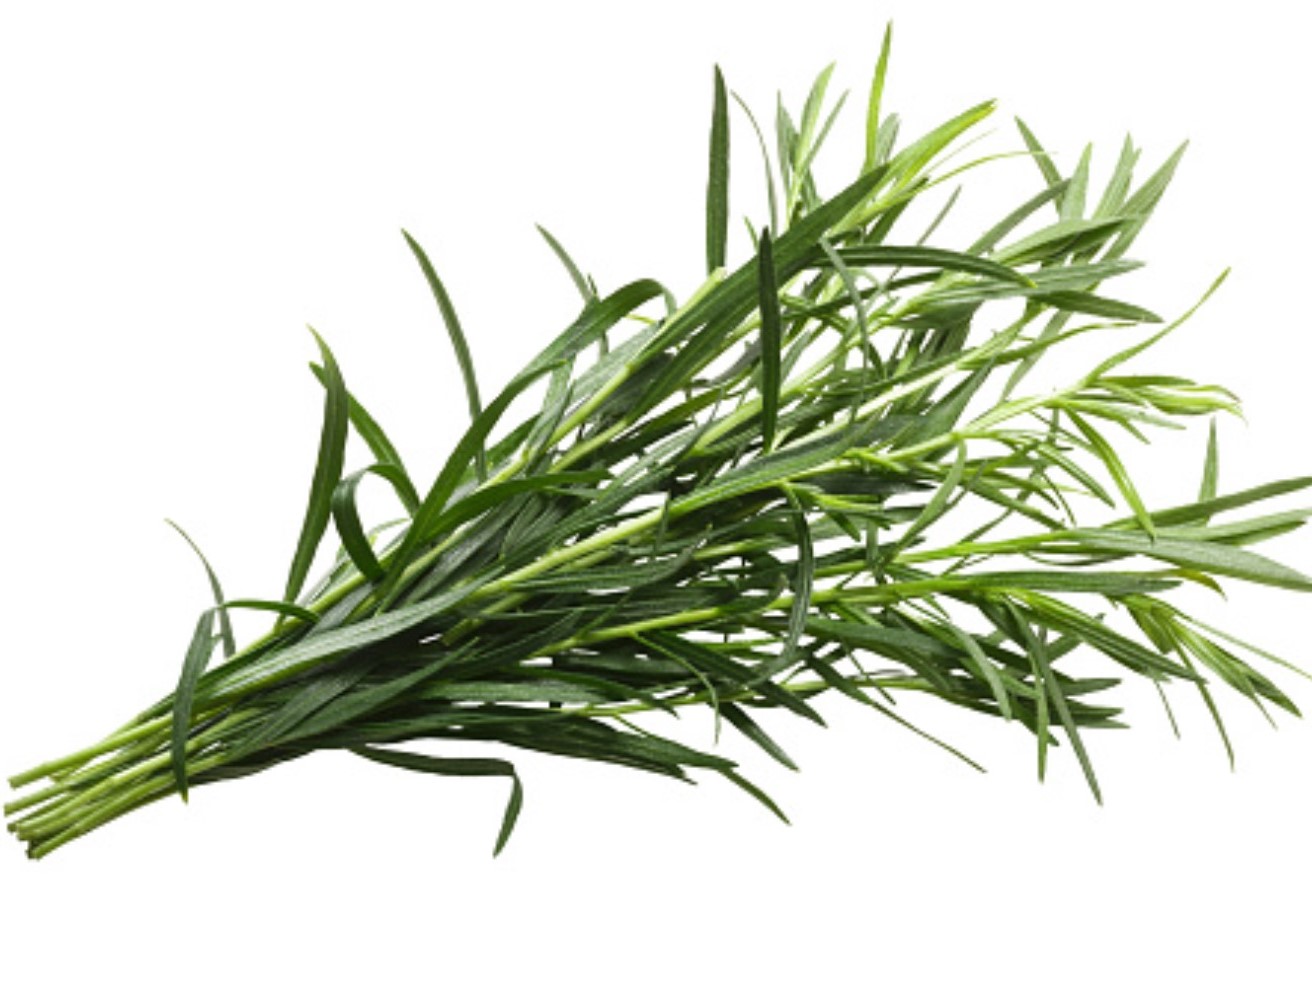 How to Grow French Tarragon in Your Garden